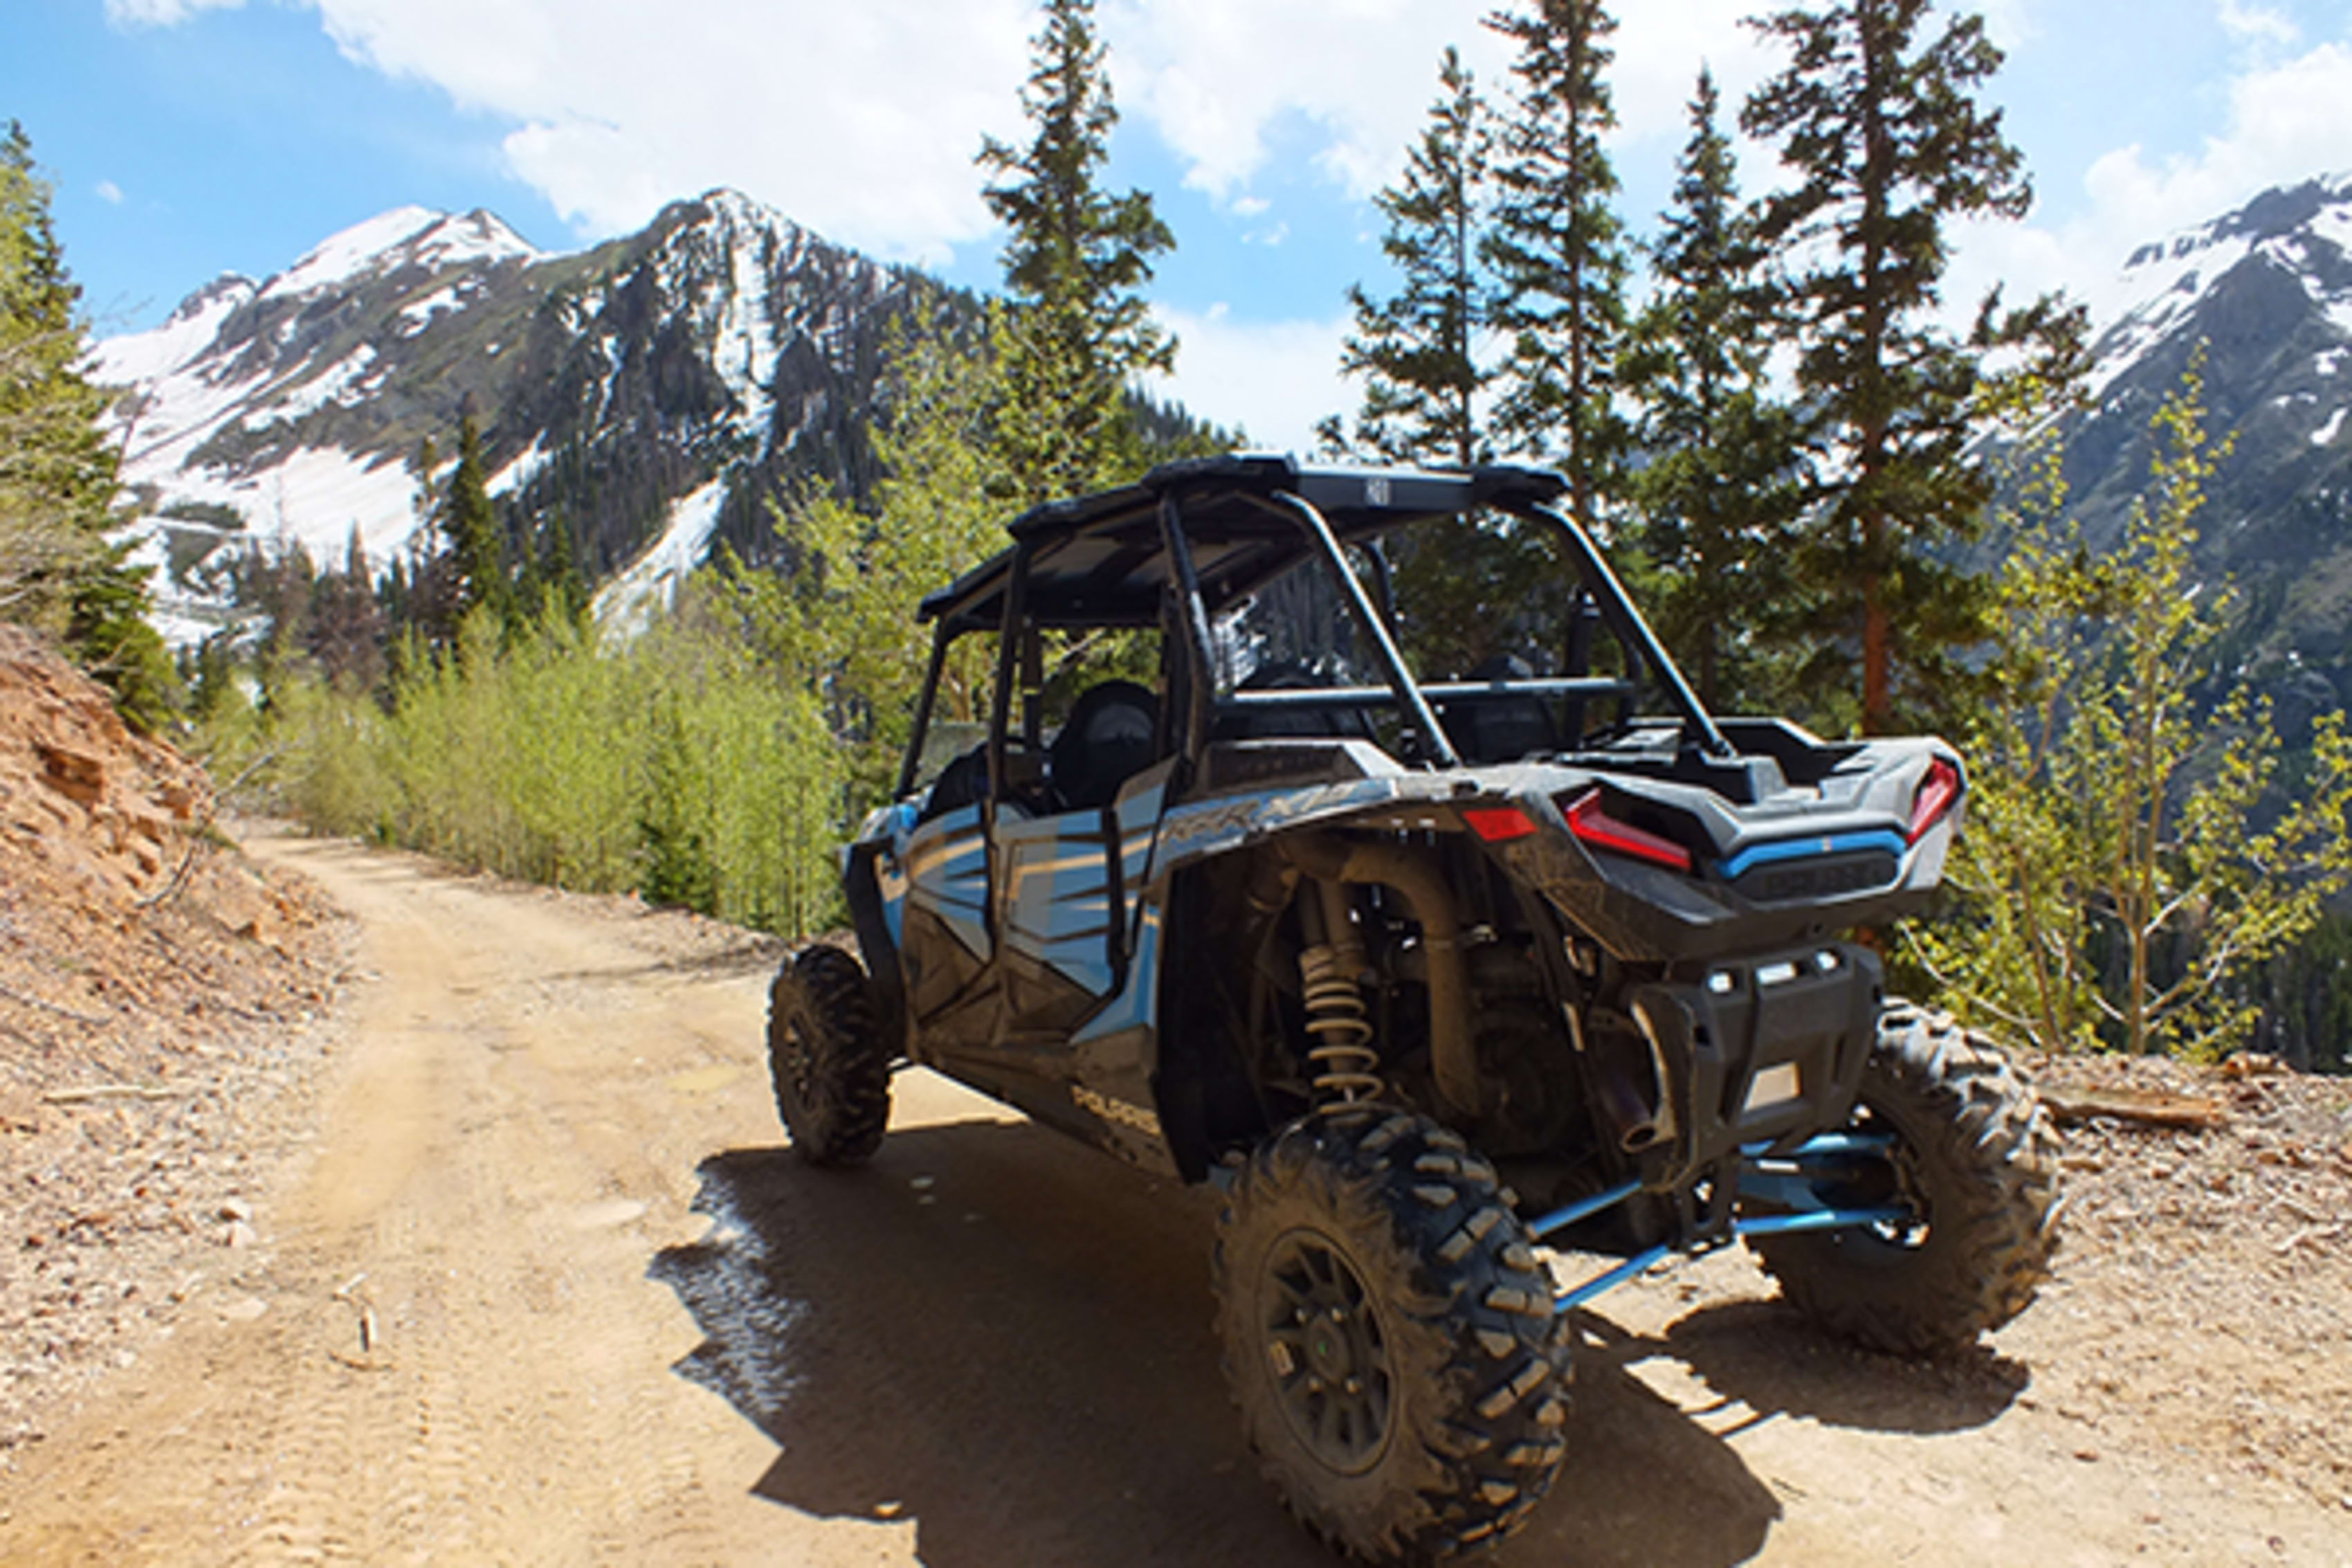 Polaris RZR from the back